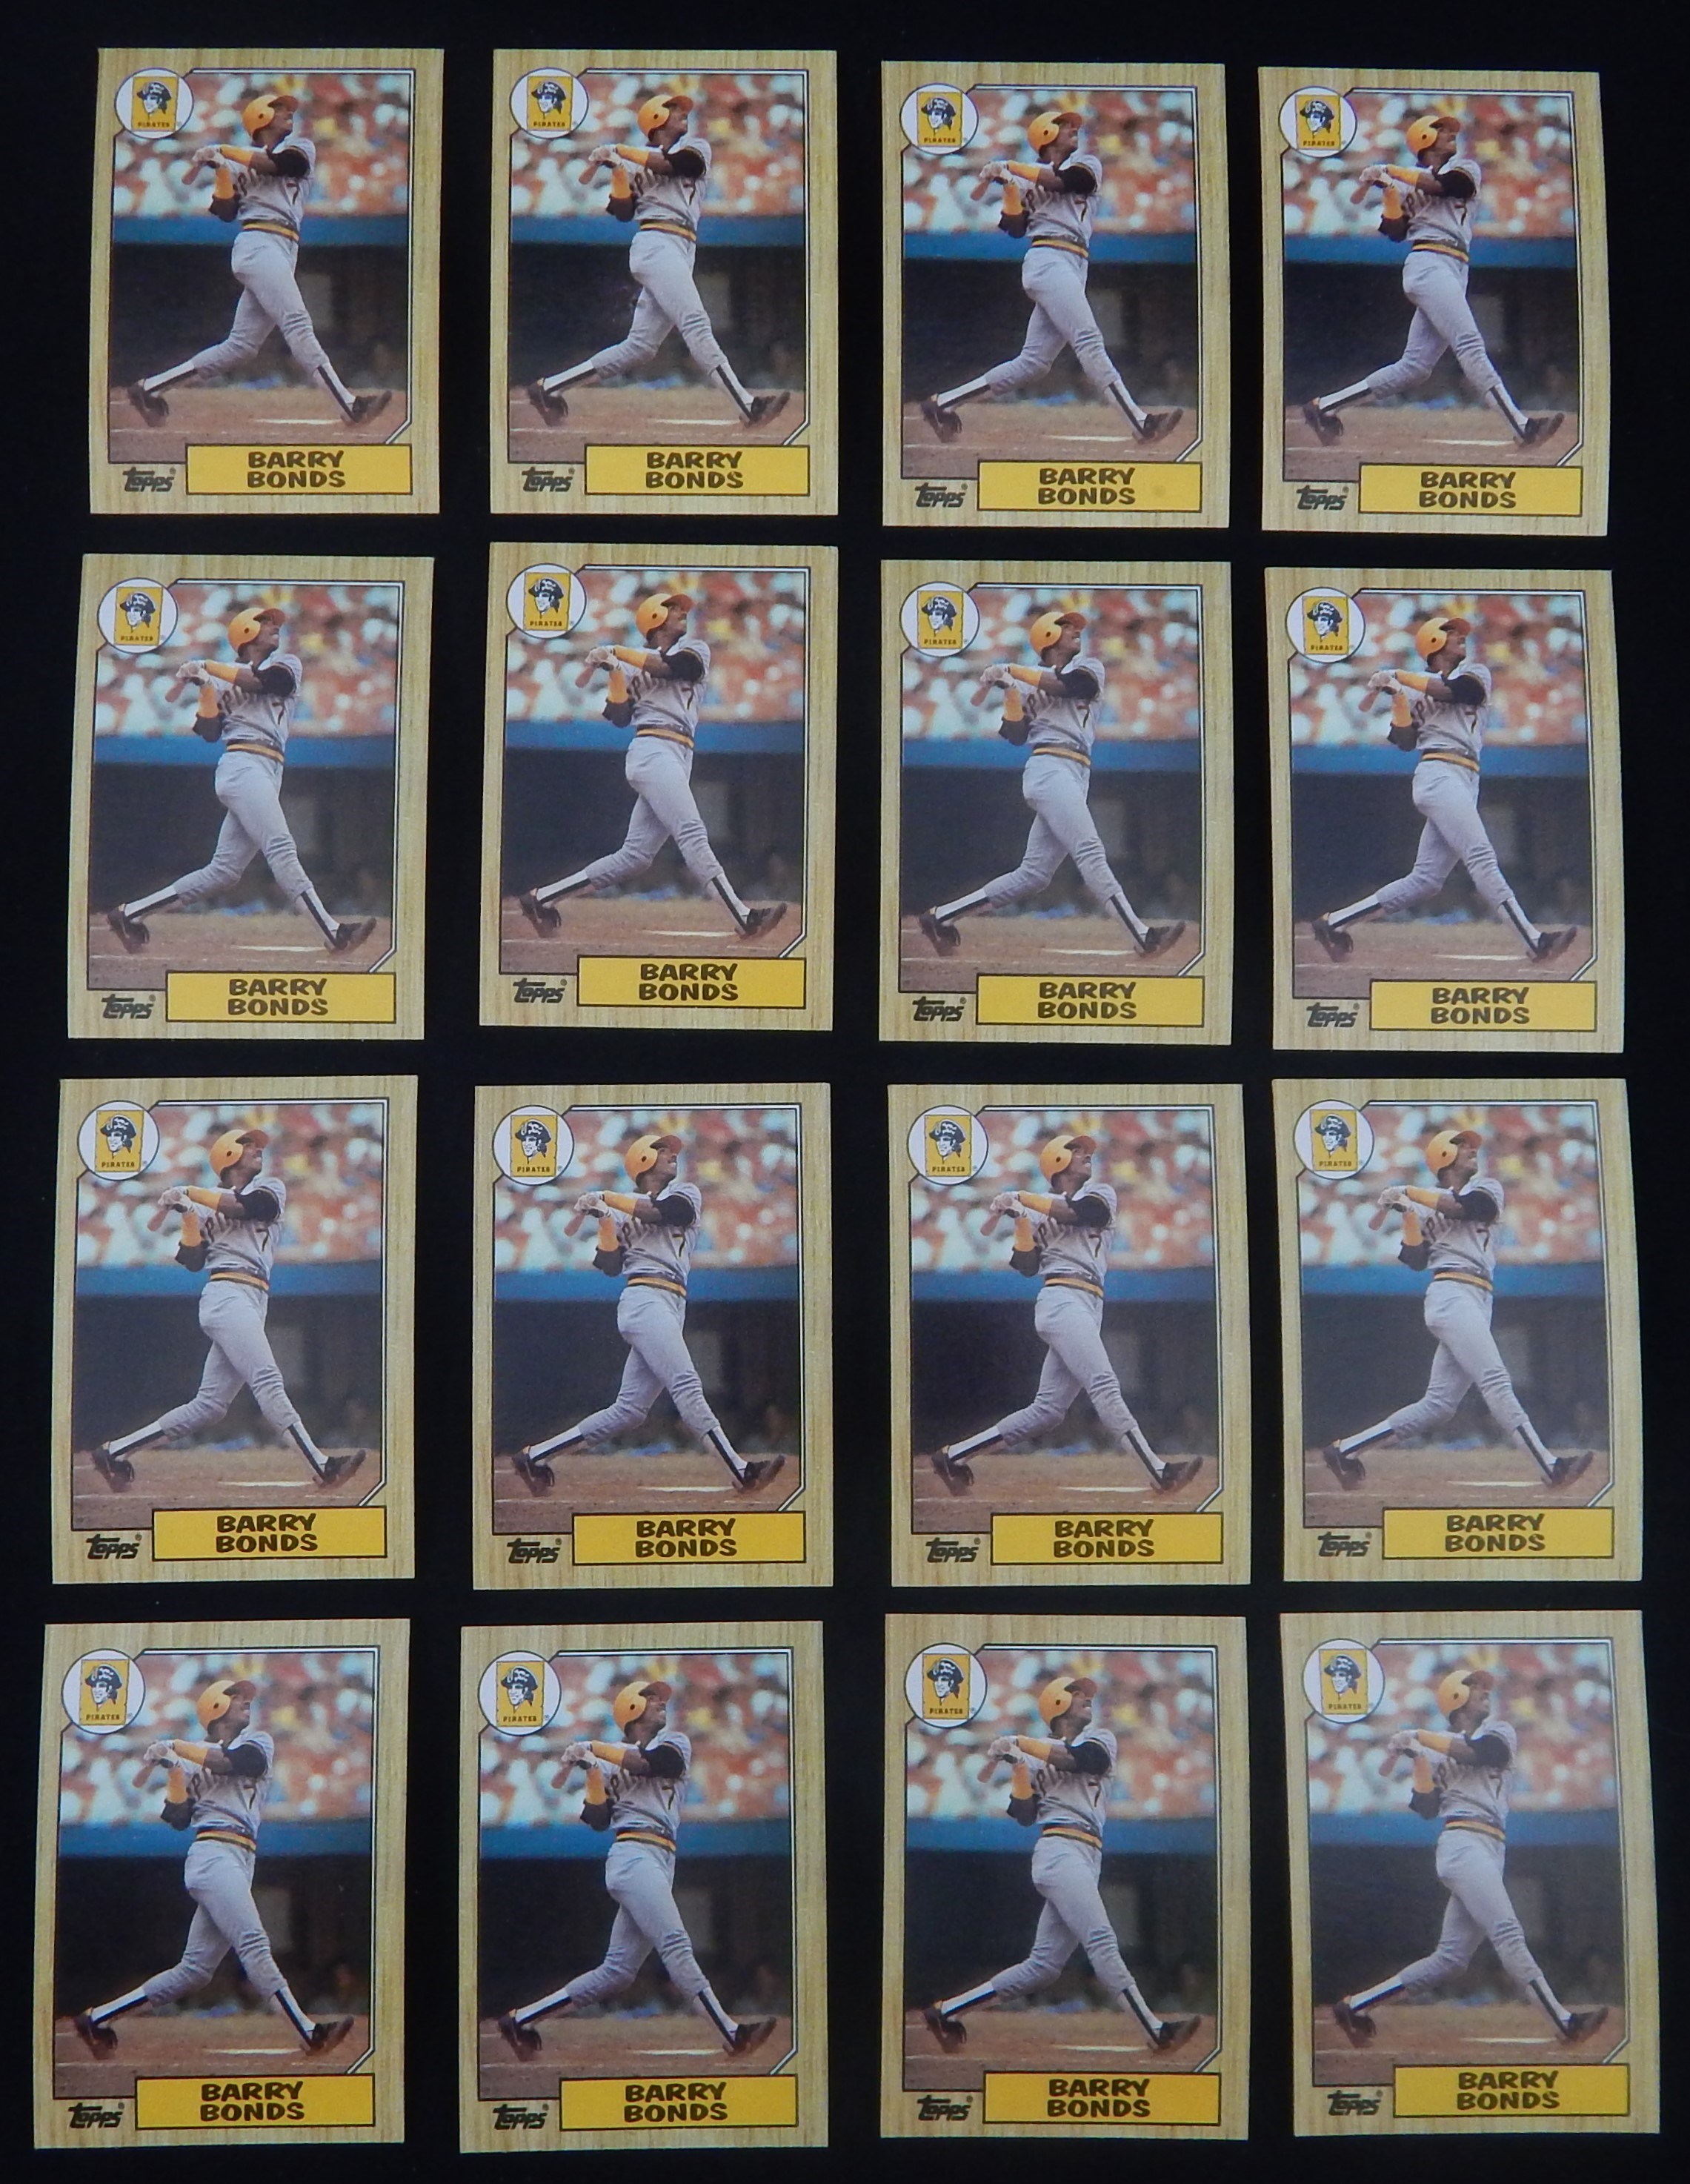 Sports Cards - Mint 1987 Topps Baseball Cards w/Complete Sets (16,000+ cards)